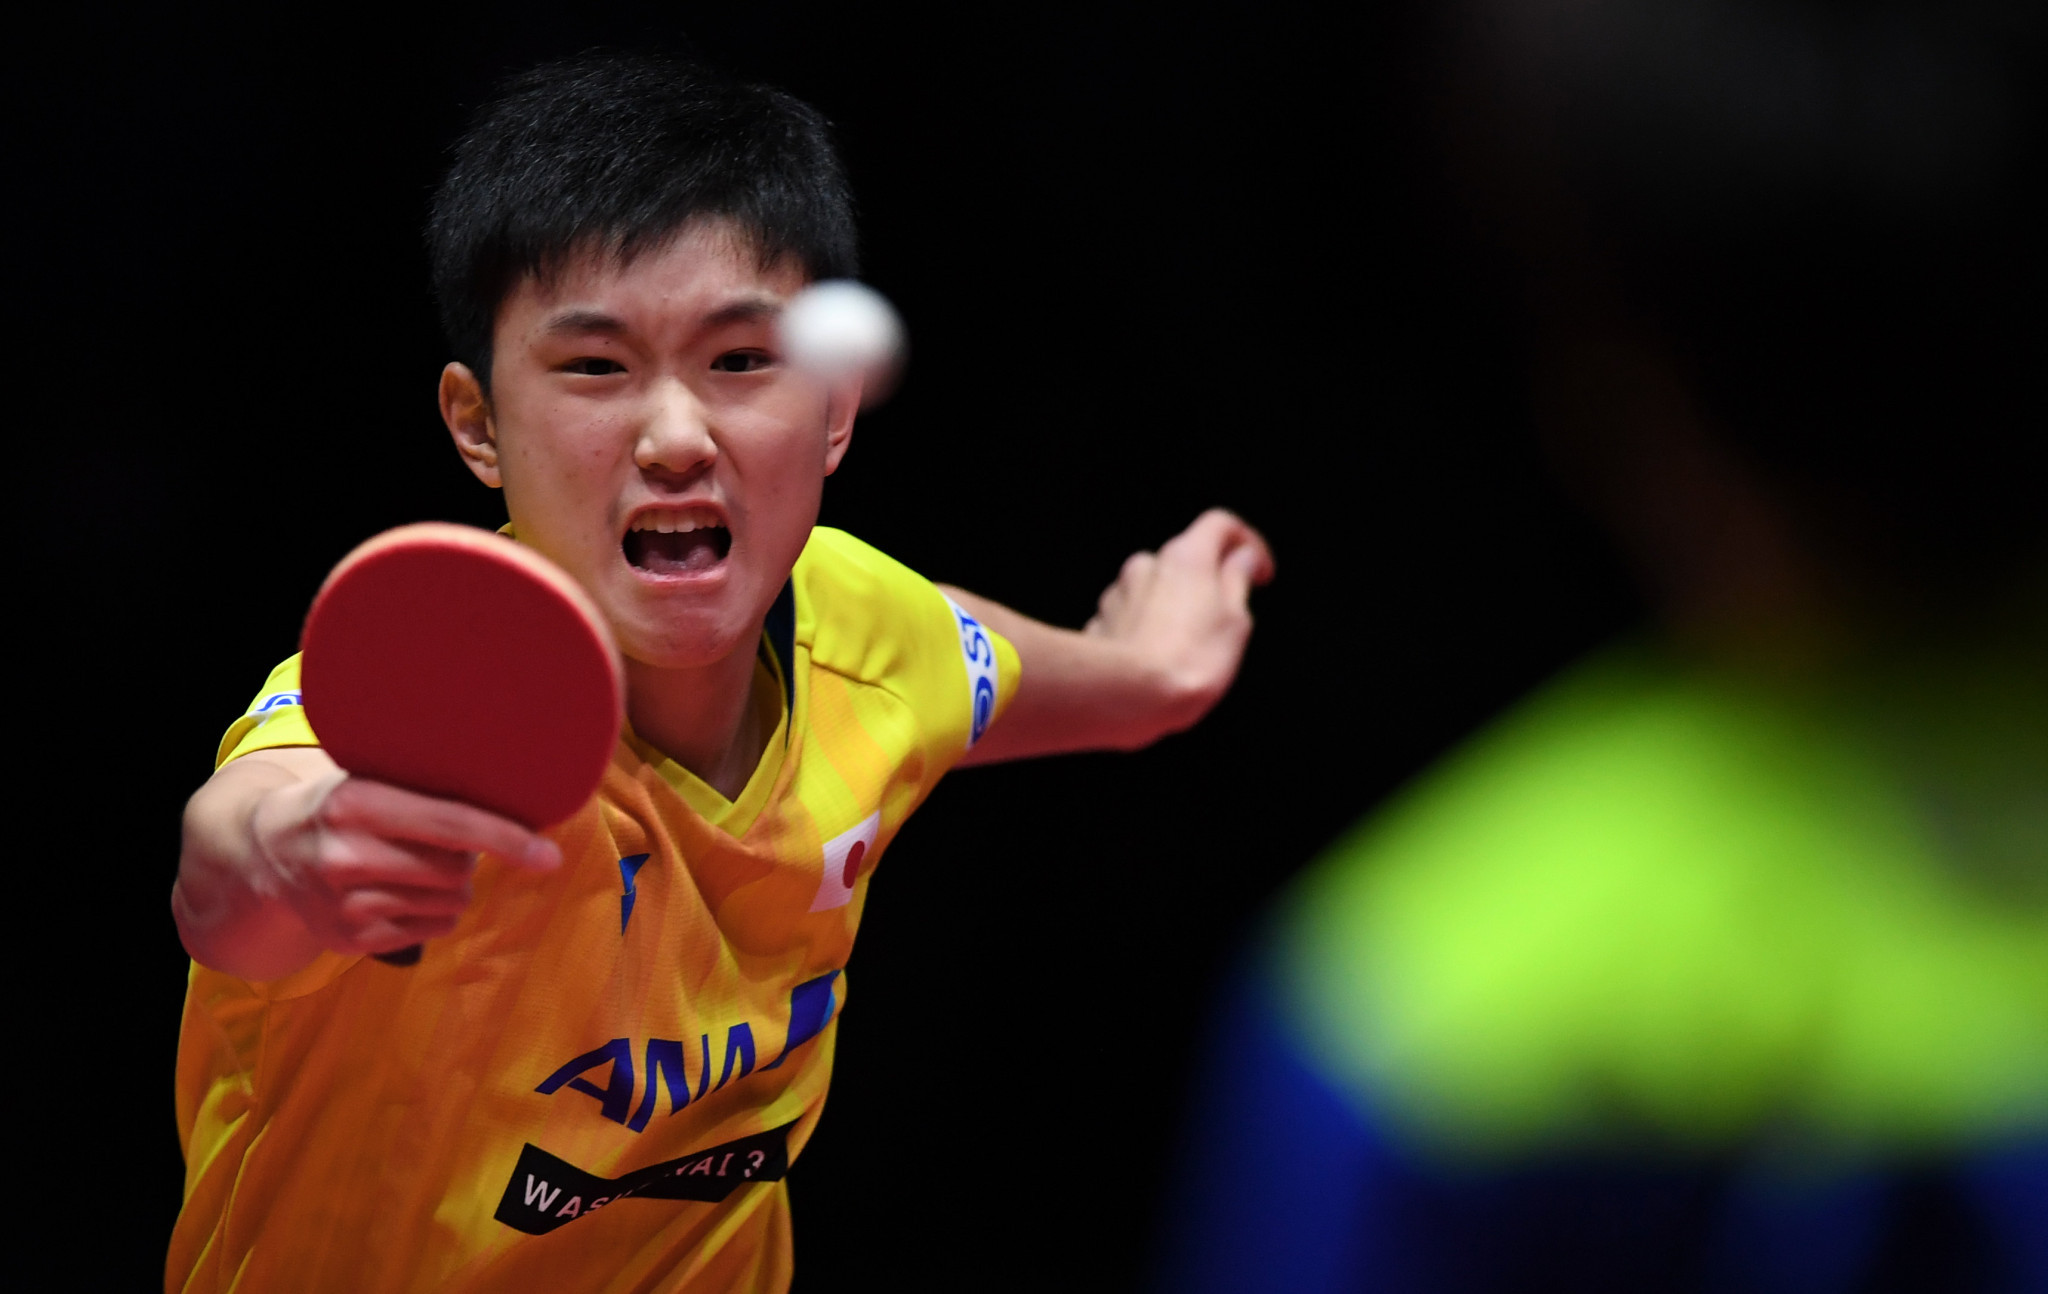 The event ends the table tennis season ©Getty Images